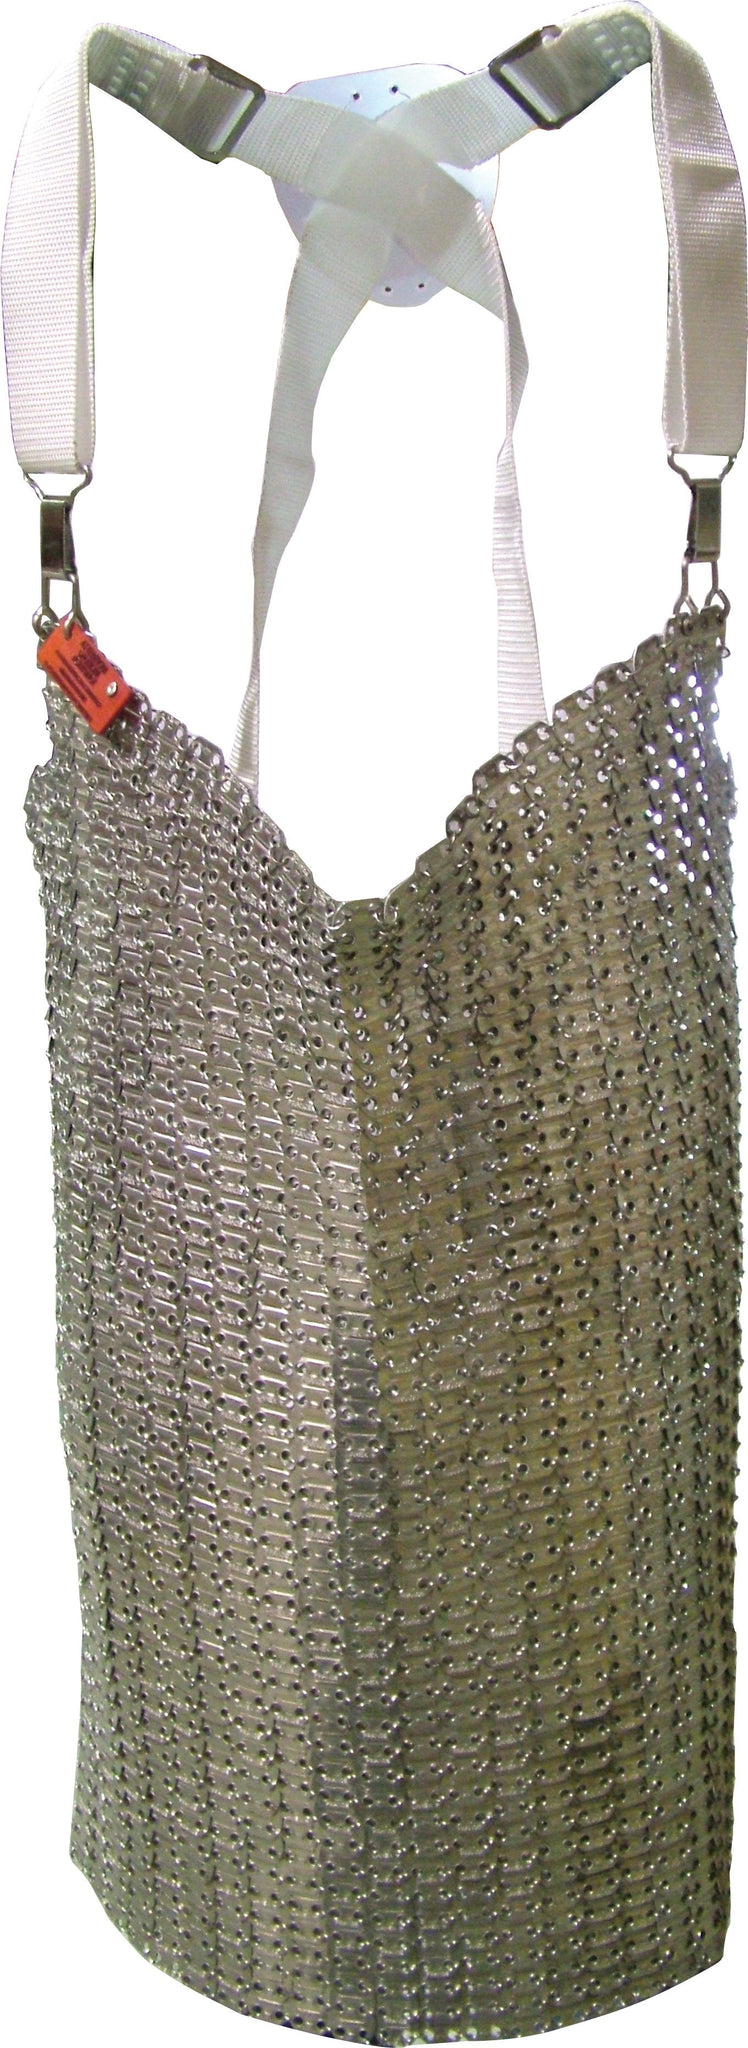 Omcan - 20” W x 20” L Stainless Steel Mesh Apron - 13533